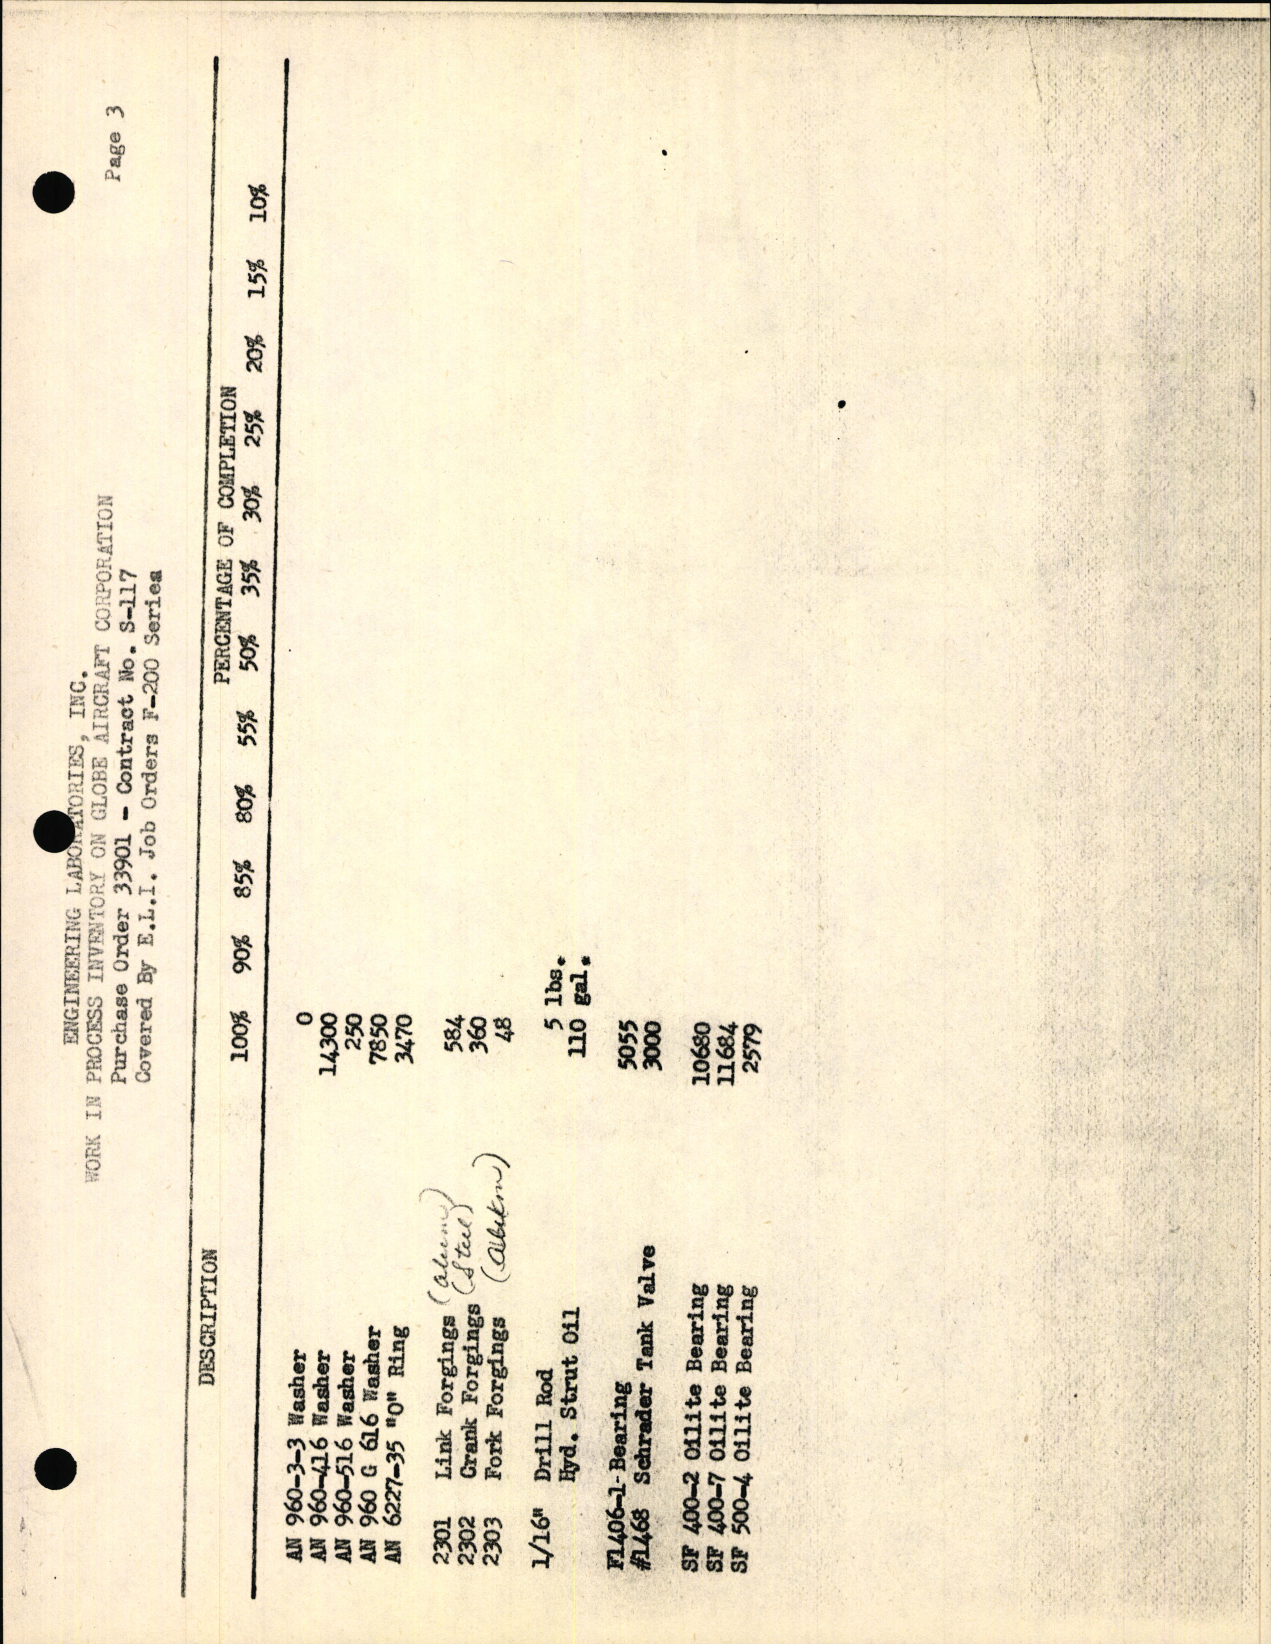 Sample page 7 from AirCorps Library document: Globe Strut Inventory and Tooling Fixtures List